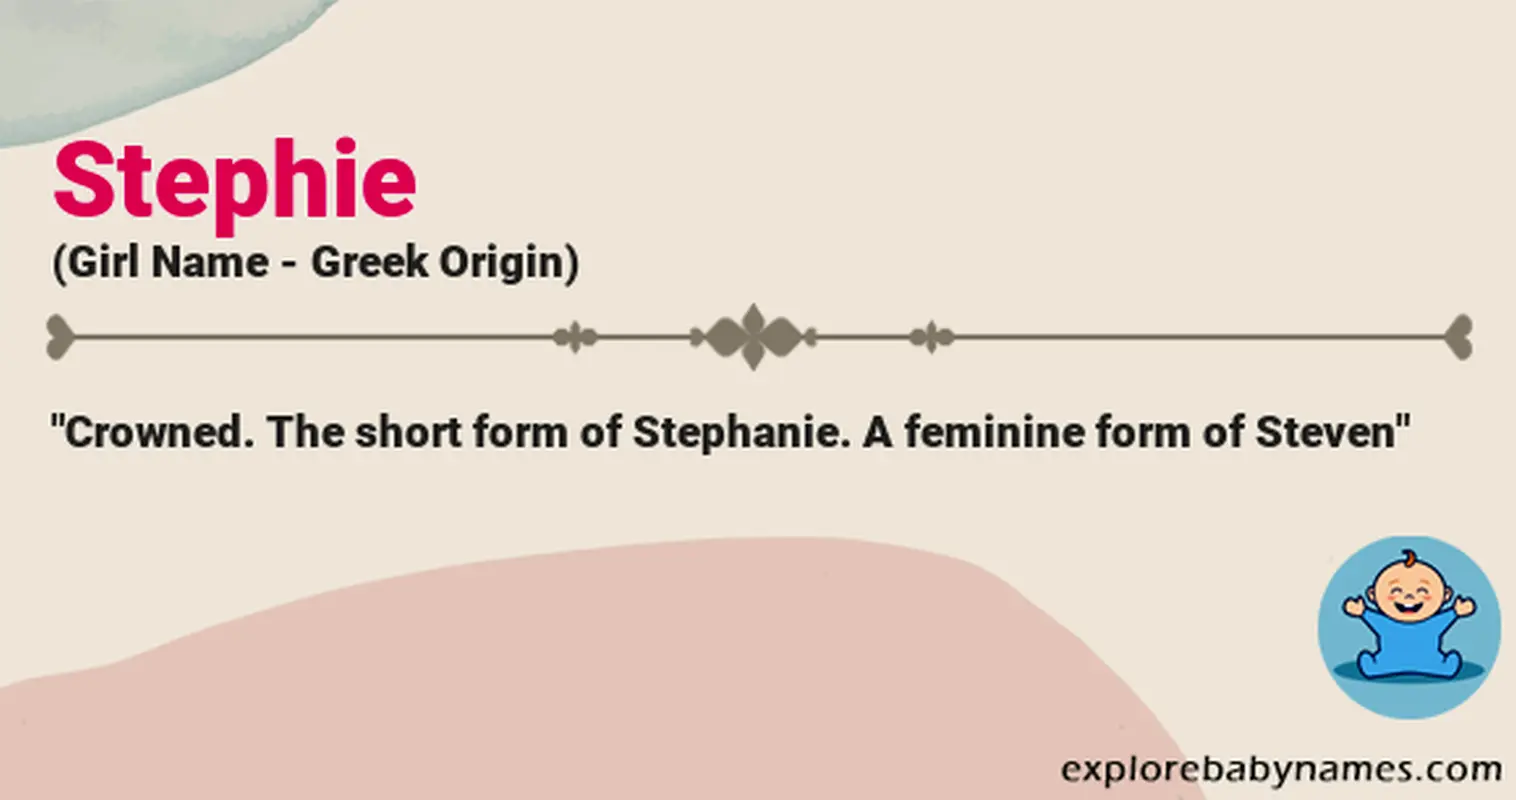 Meaning of Stephie